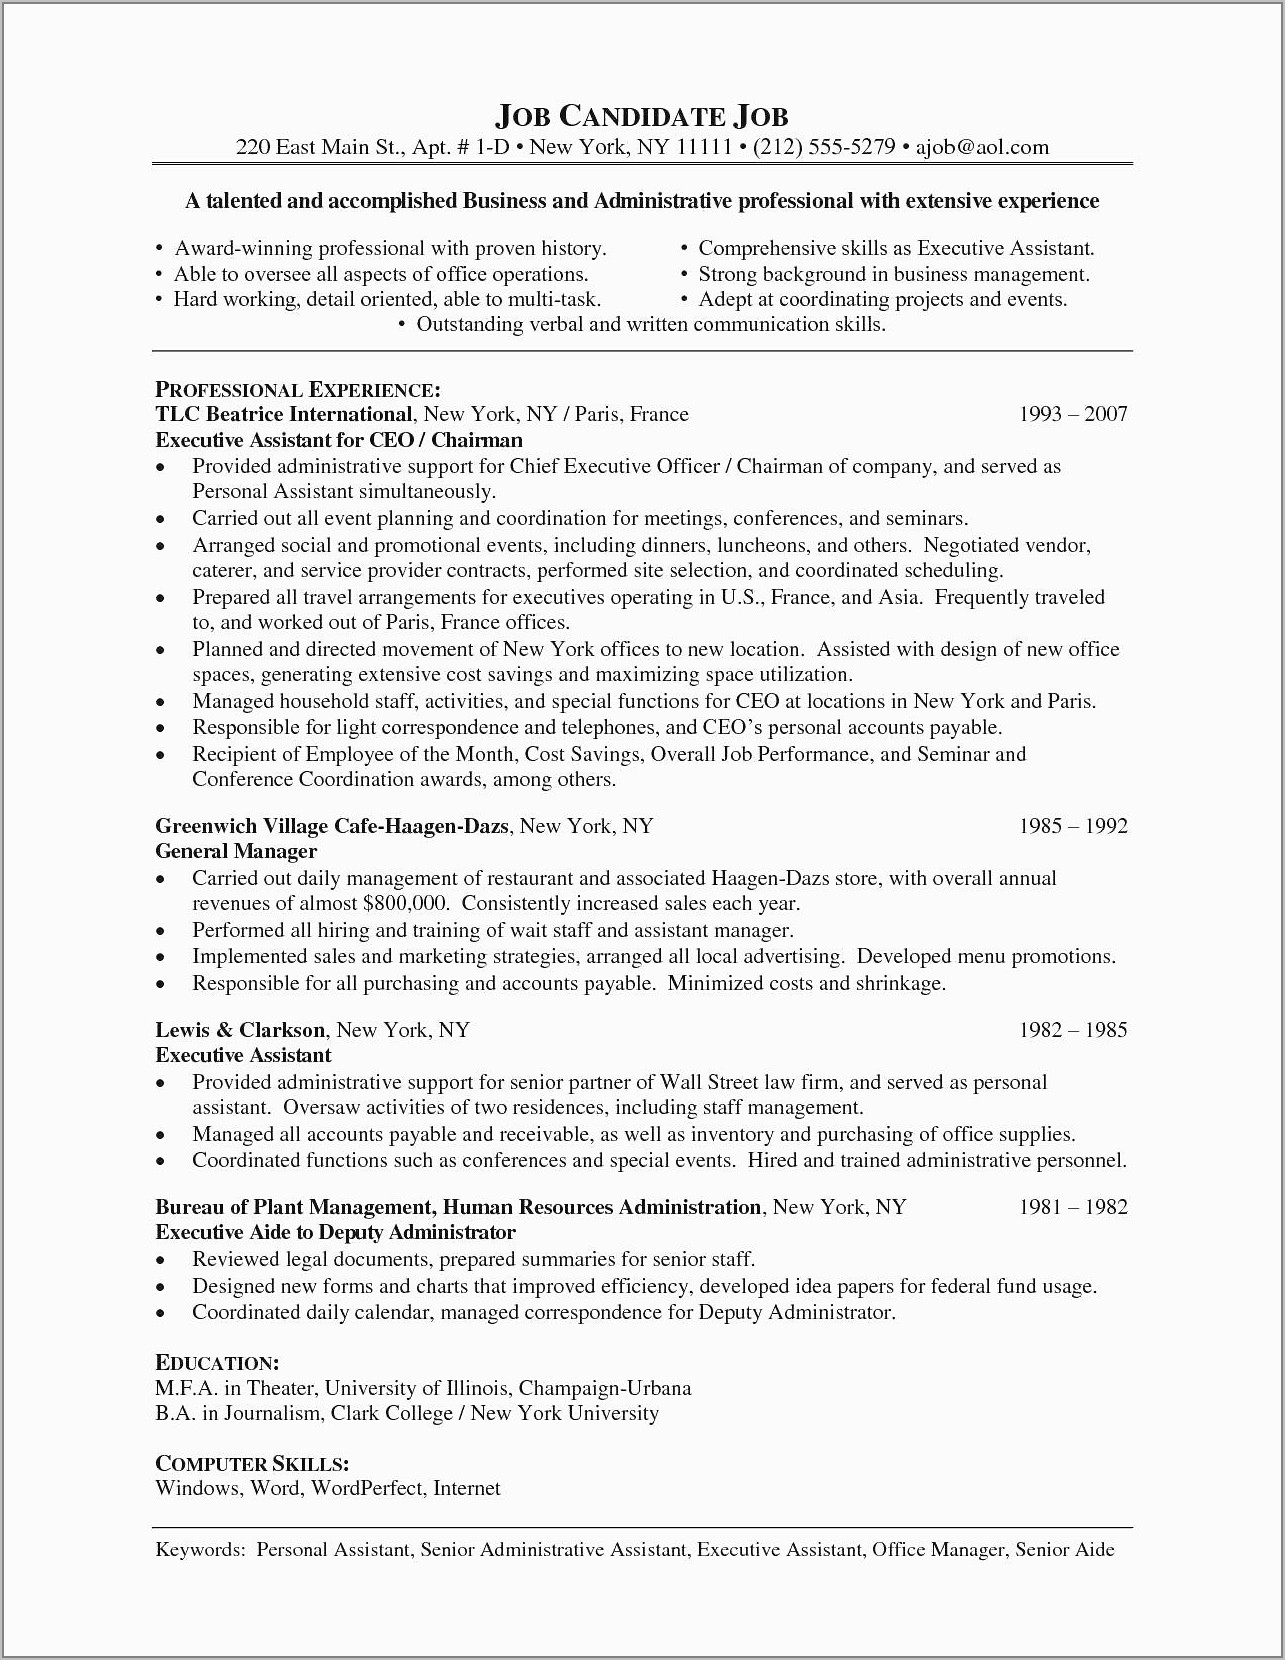 Resume Samples For Accounts Payable Manager